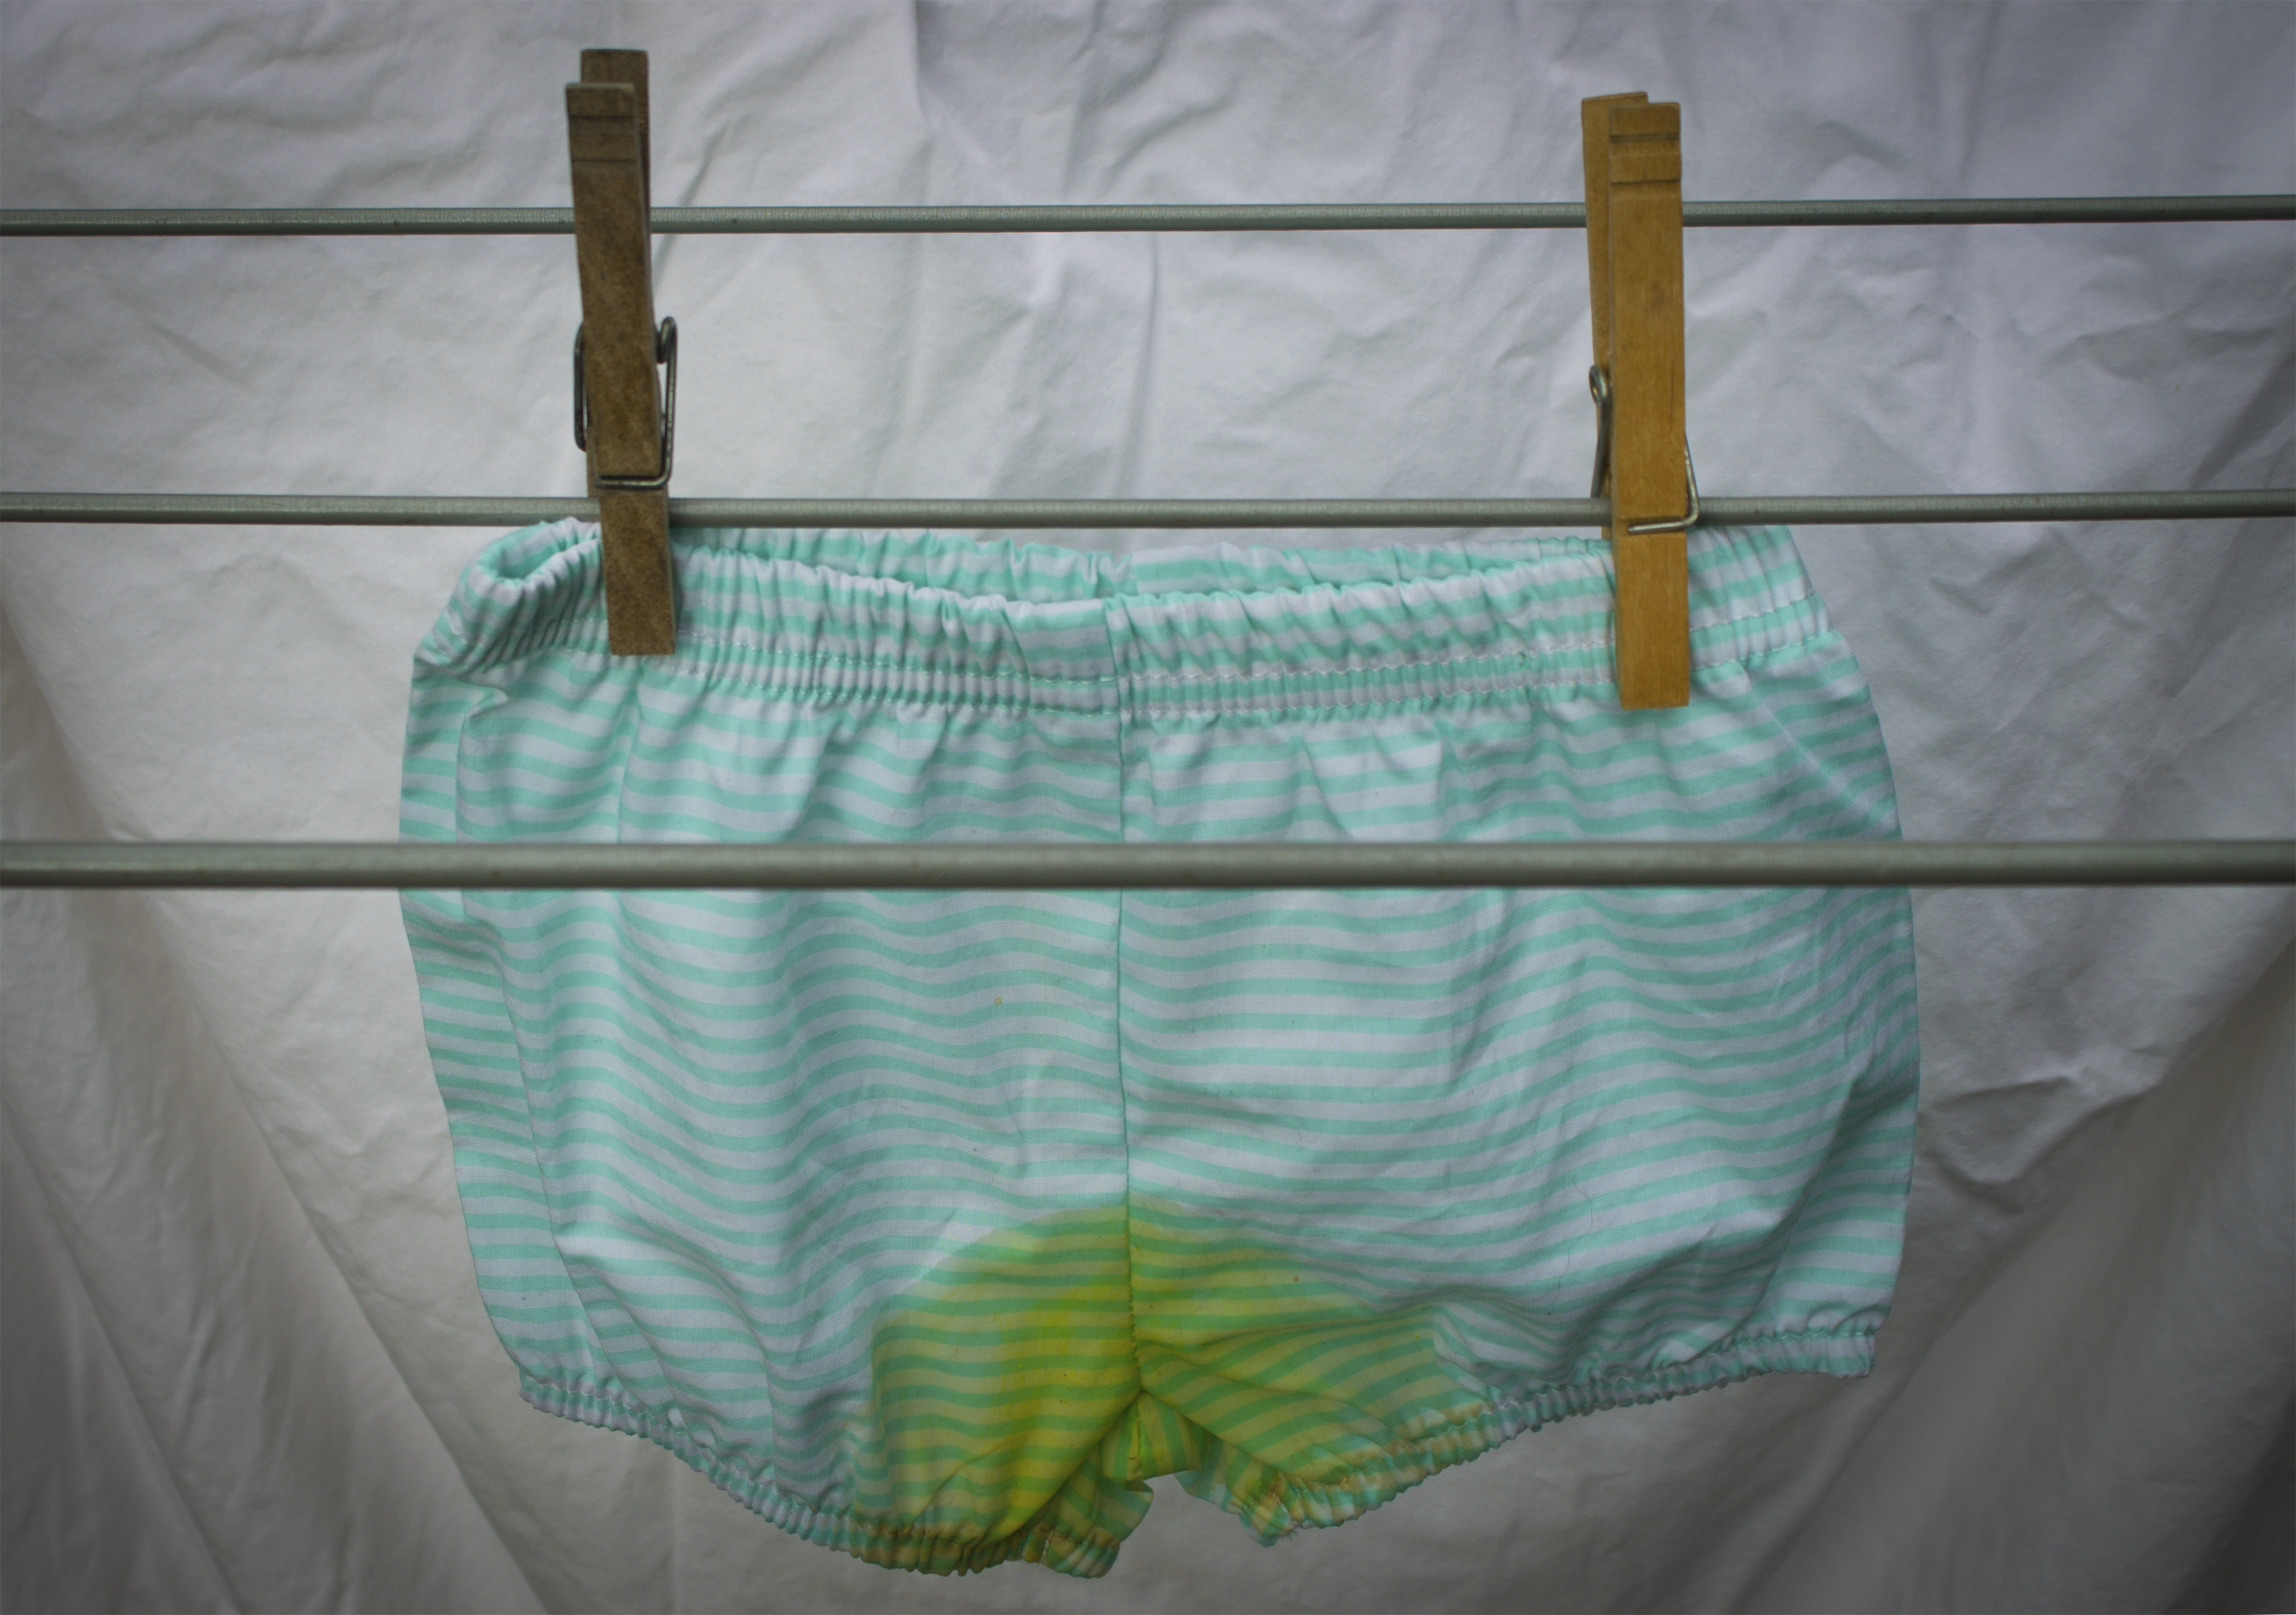 This is a phtoto of underwear stained with pee being hung on a clothesline.